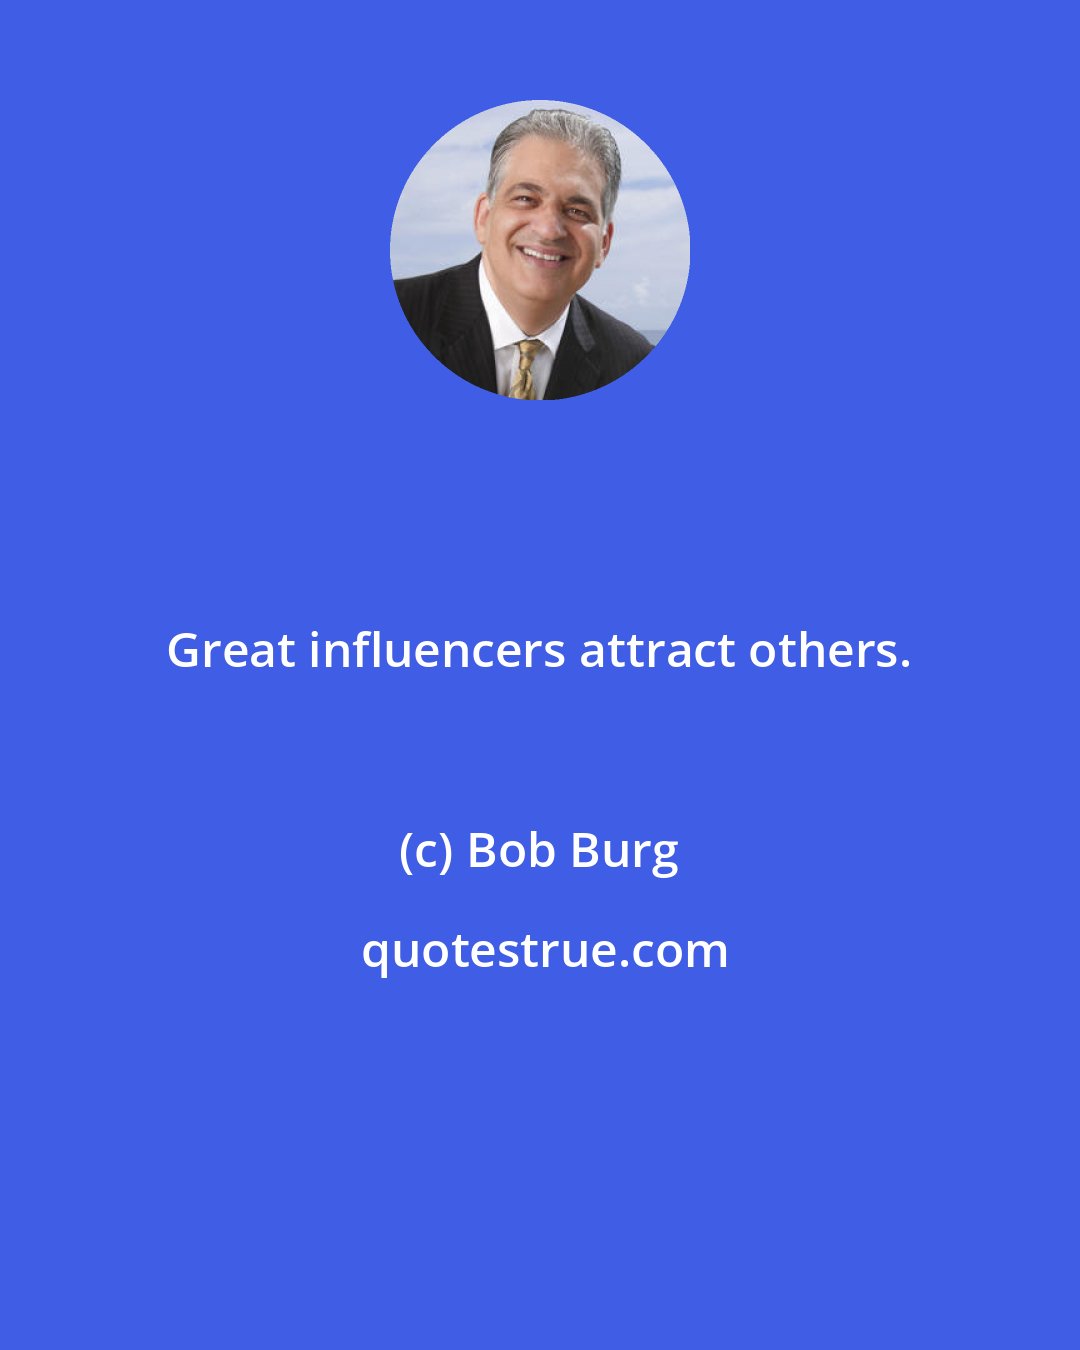 Bob Burg: Great influencers attract others.